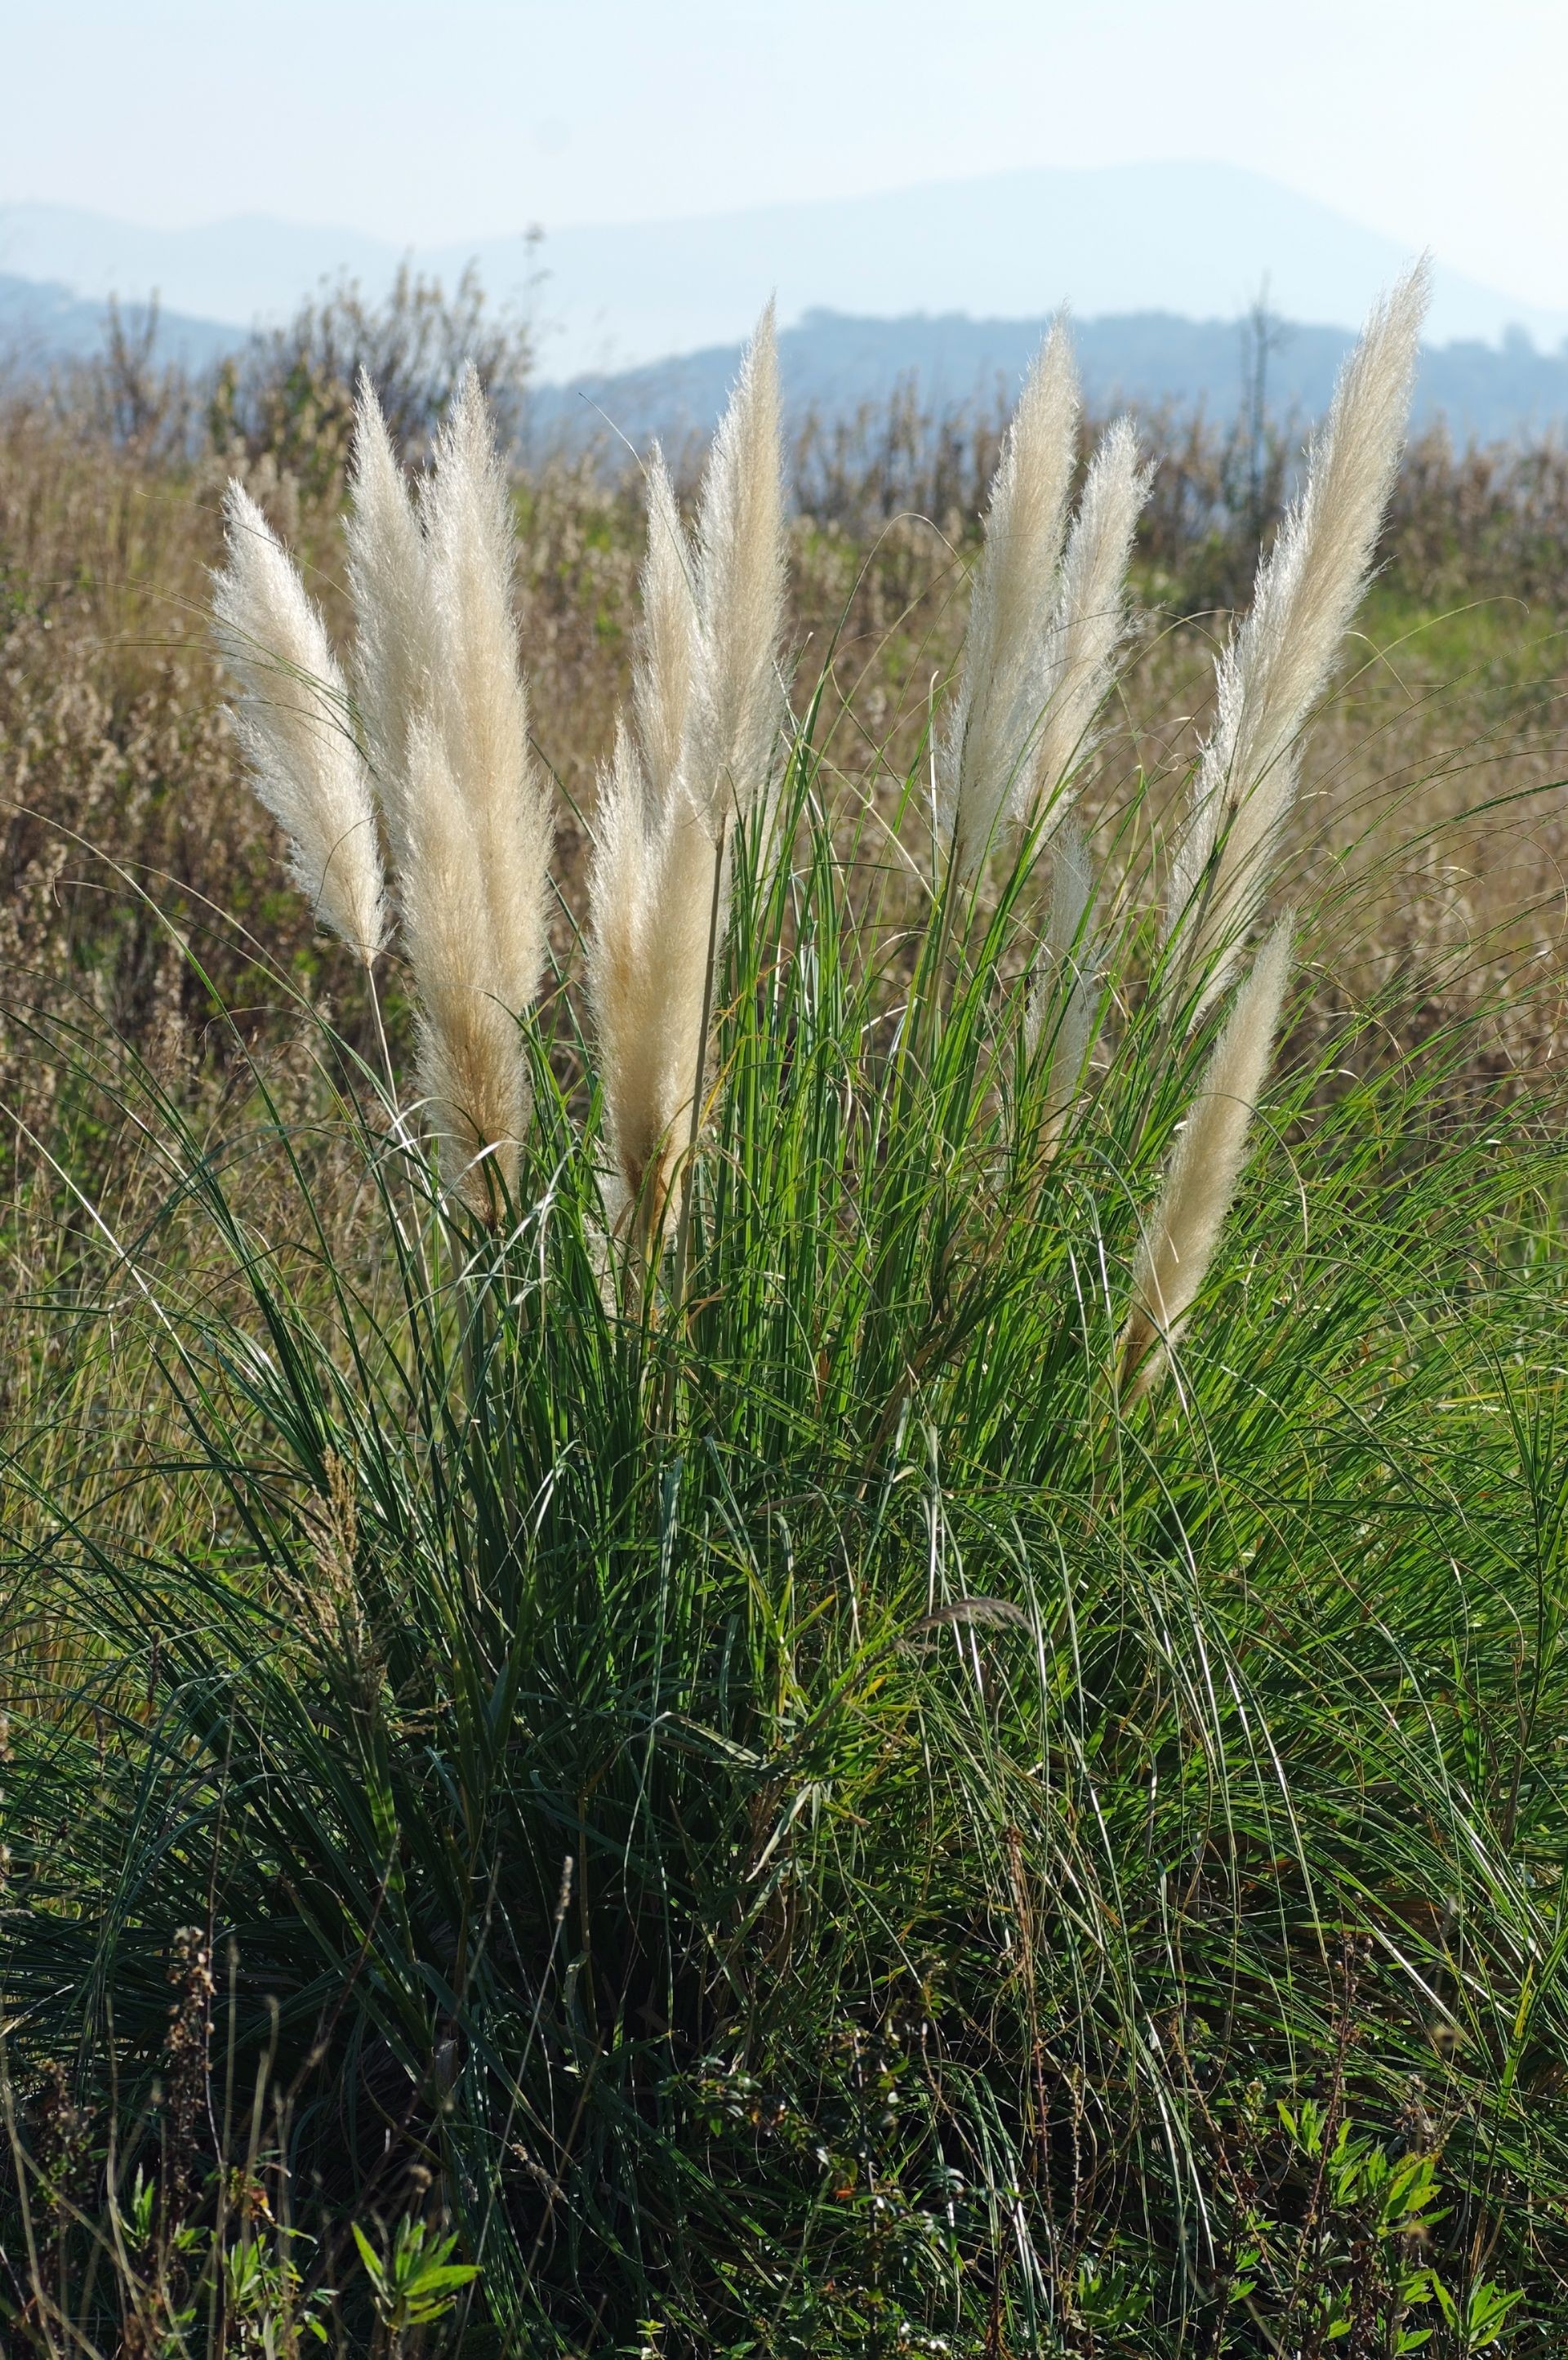 This is Cortaderia selloana, the pampas grass, from the family Poaceae, it is native to Brazil, Argentina and Chile, bloom time from August to February, popular ornamenta plant in gardens